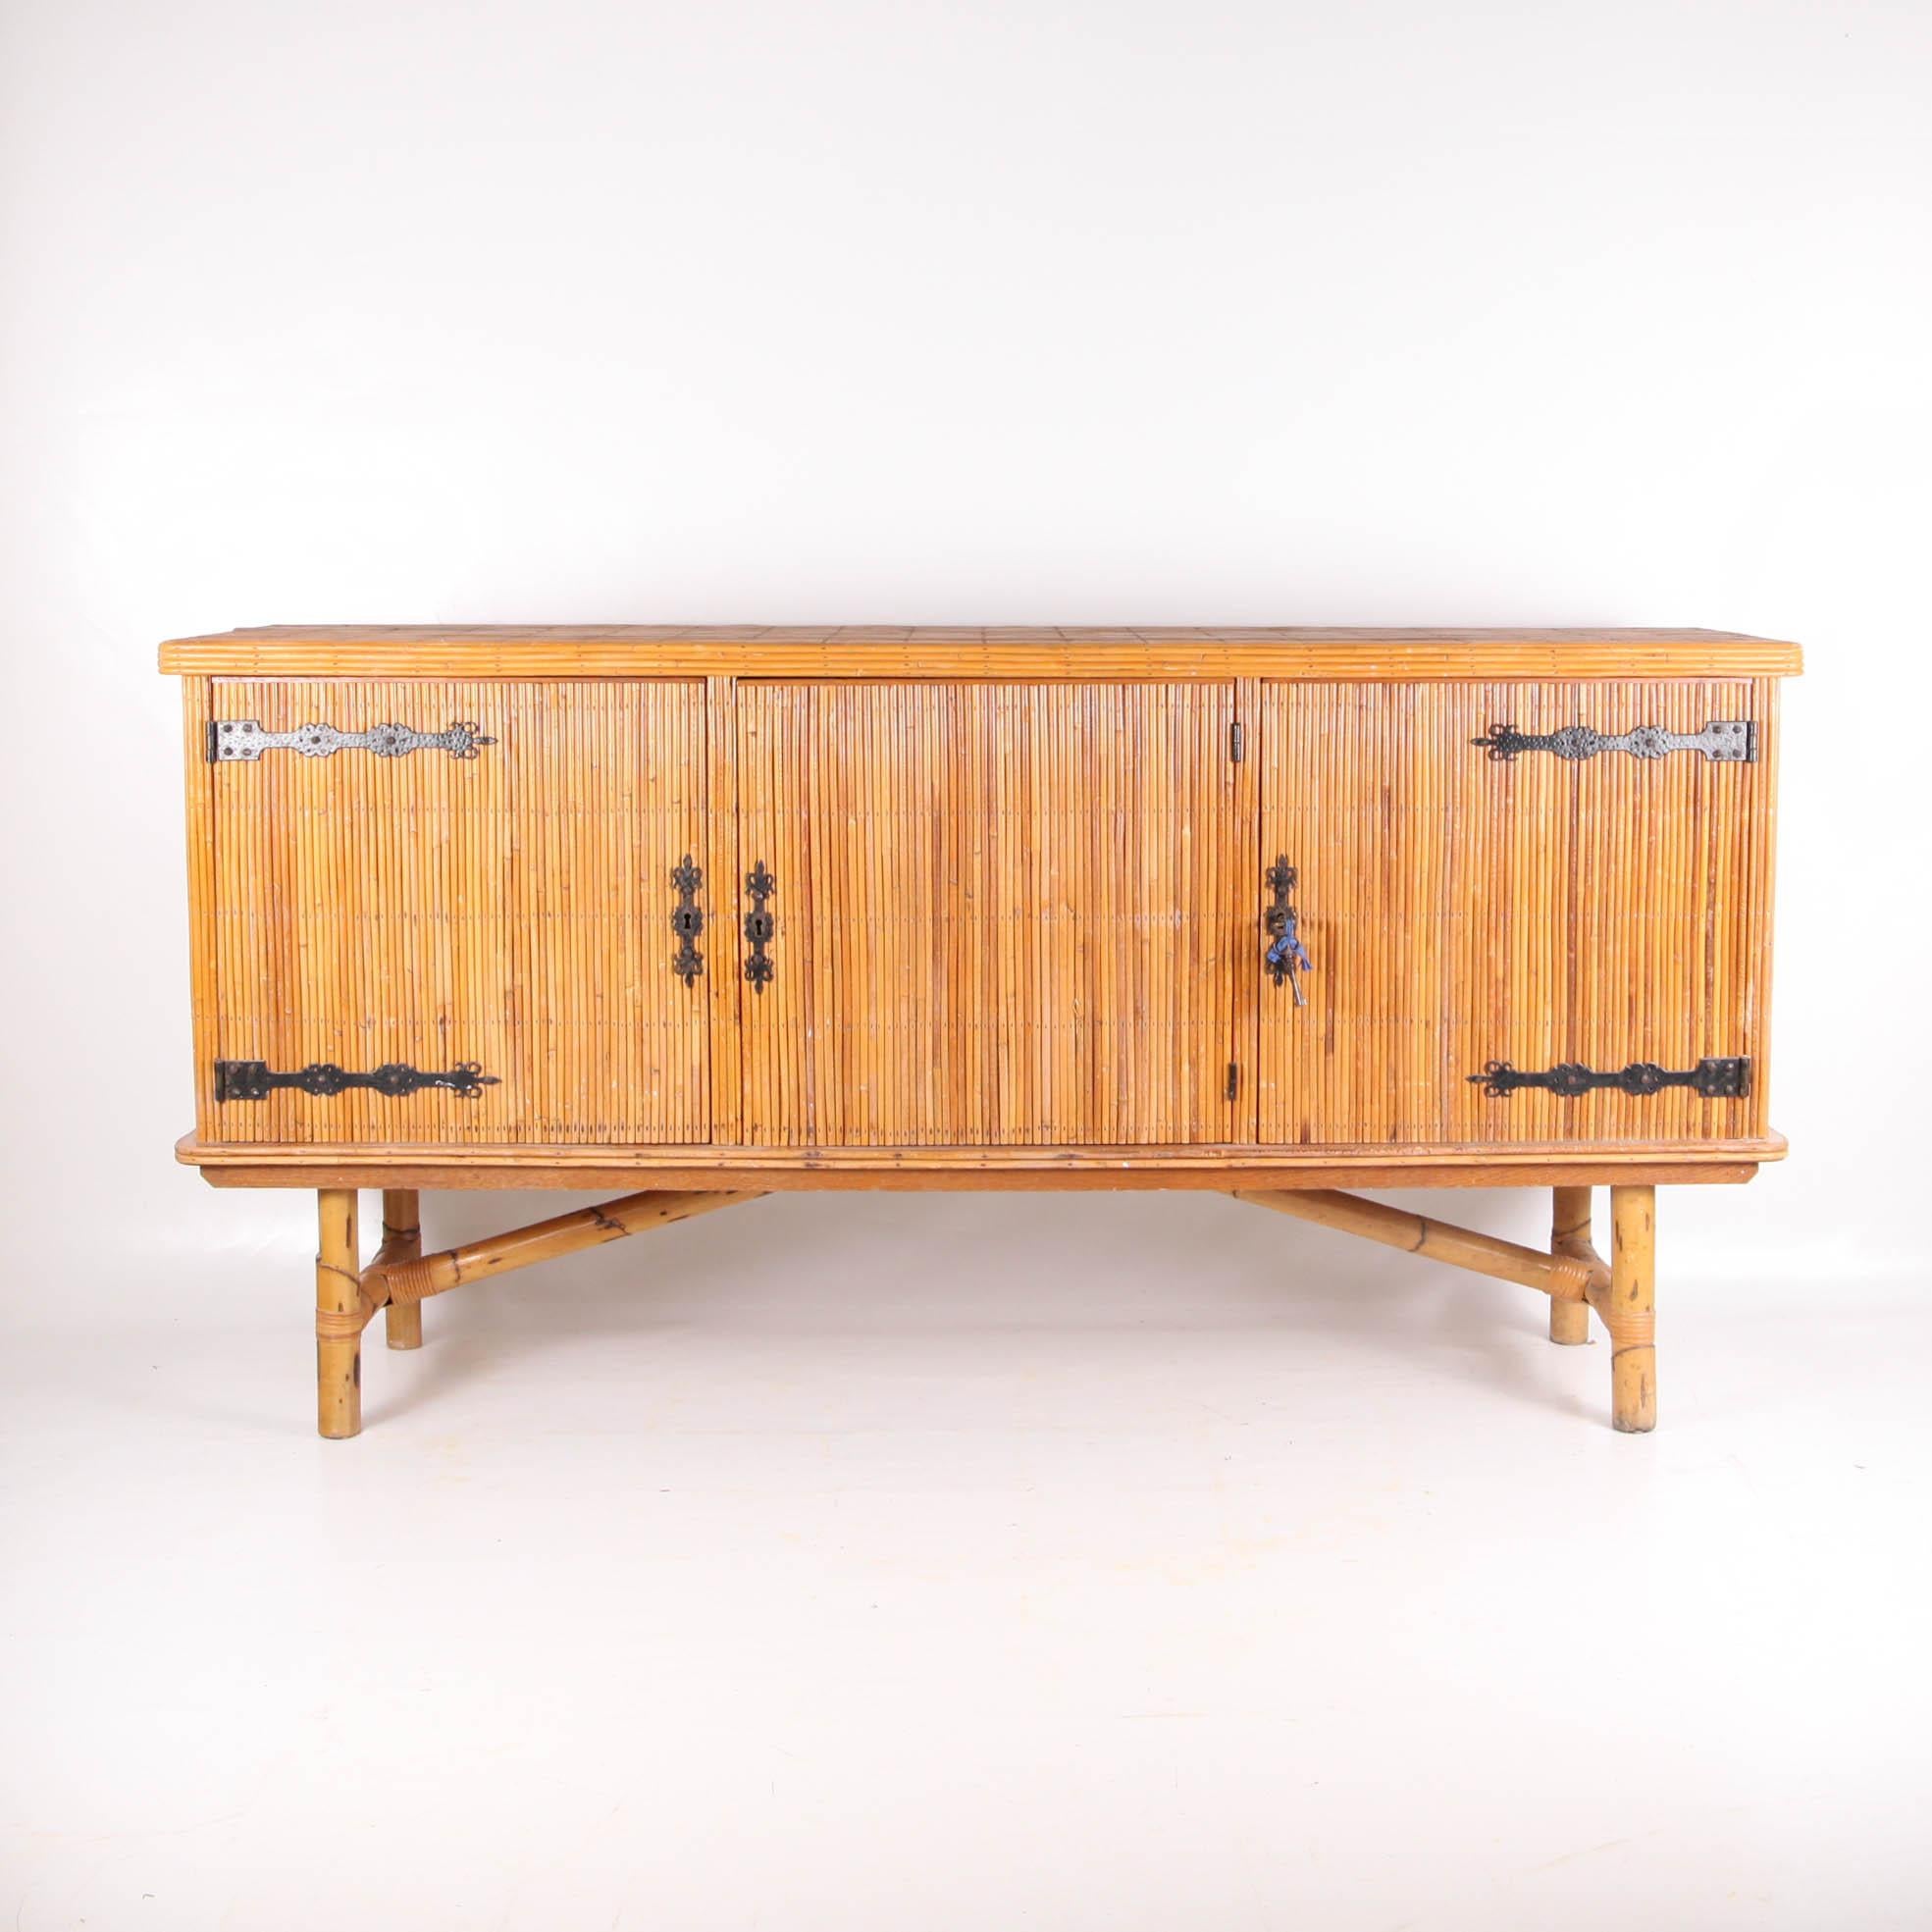 Vintage rattan sideboard attributed to Audoux Minet.